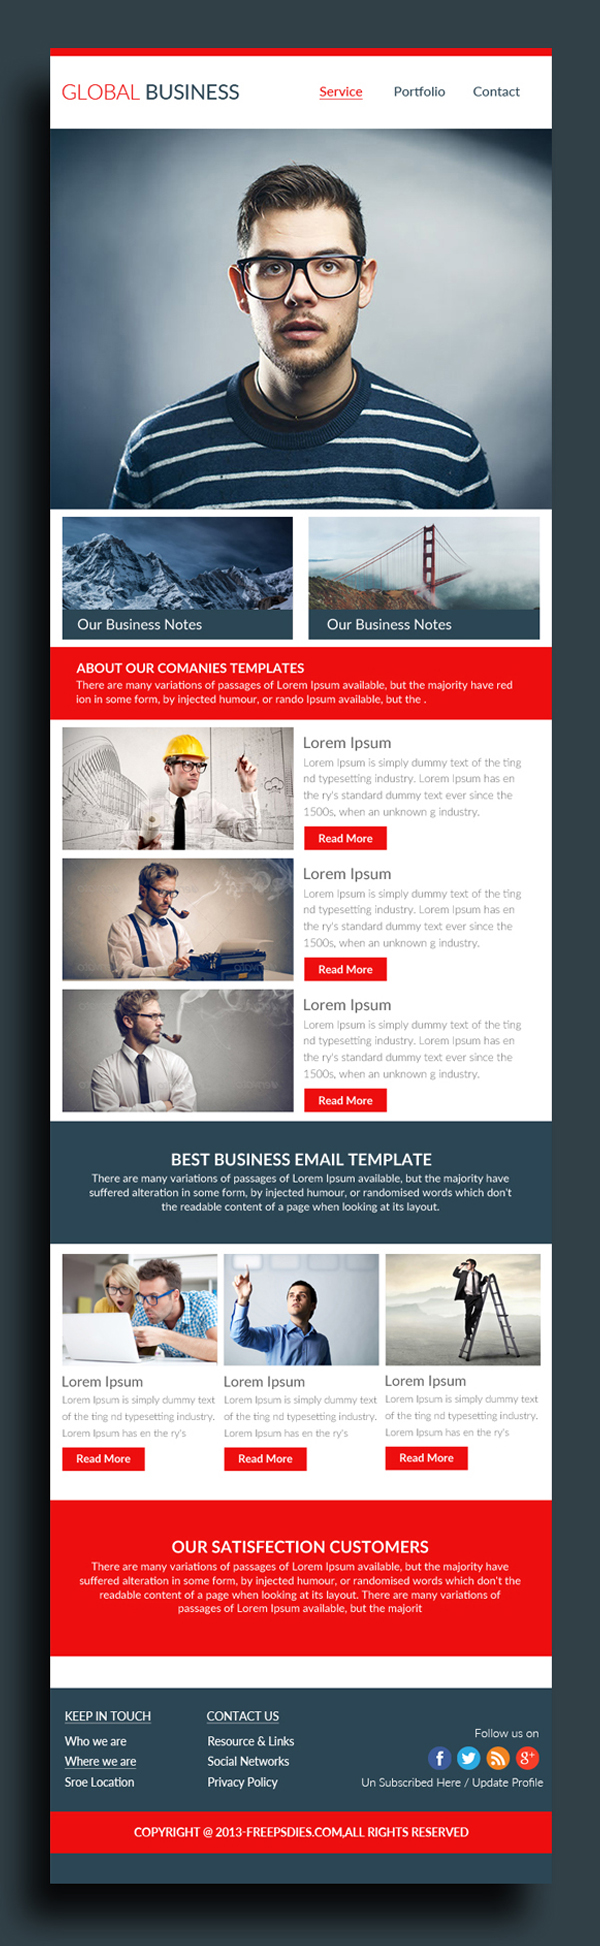 Free Business Email Template PSD